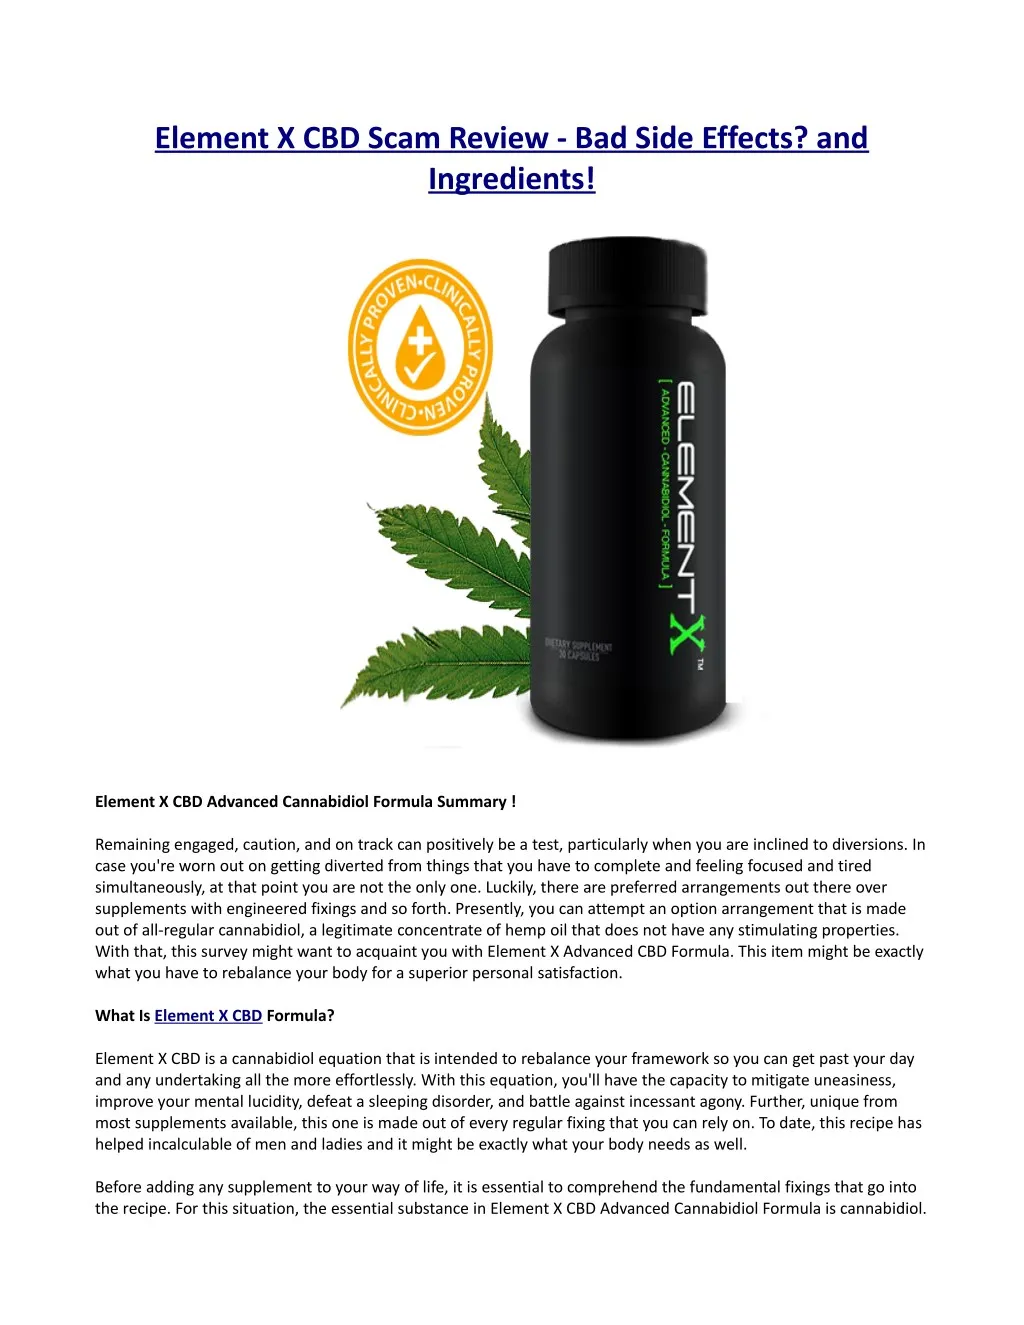 element x cbd scam review bad side effects